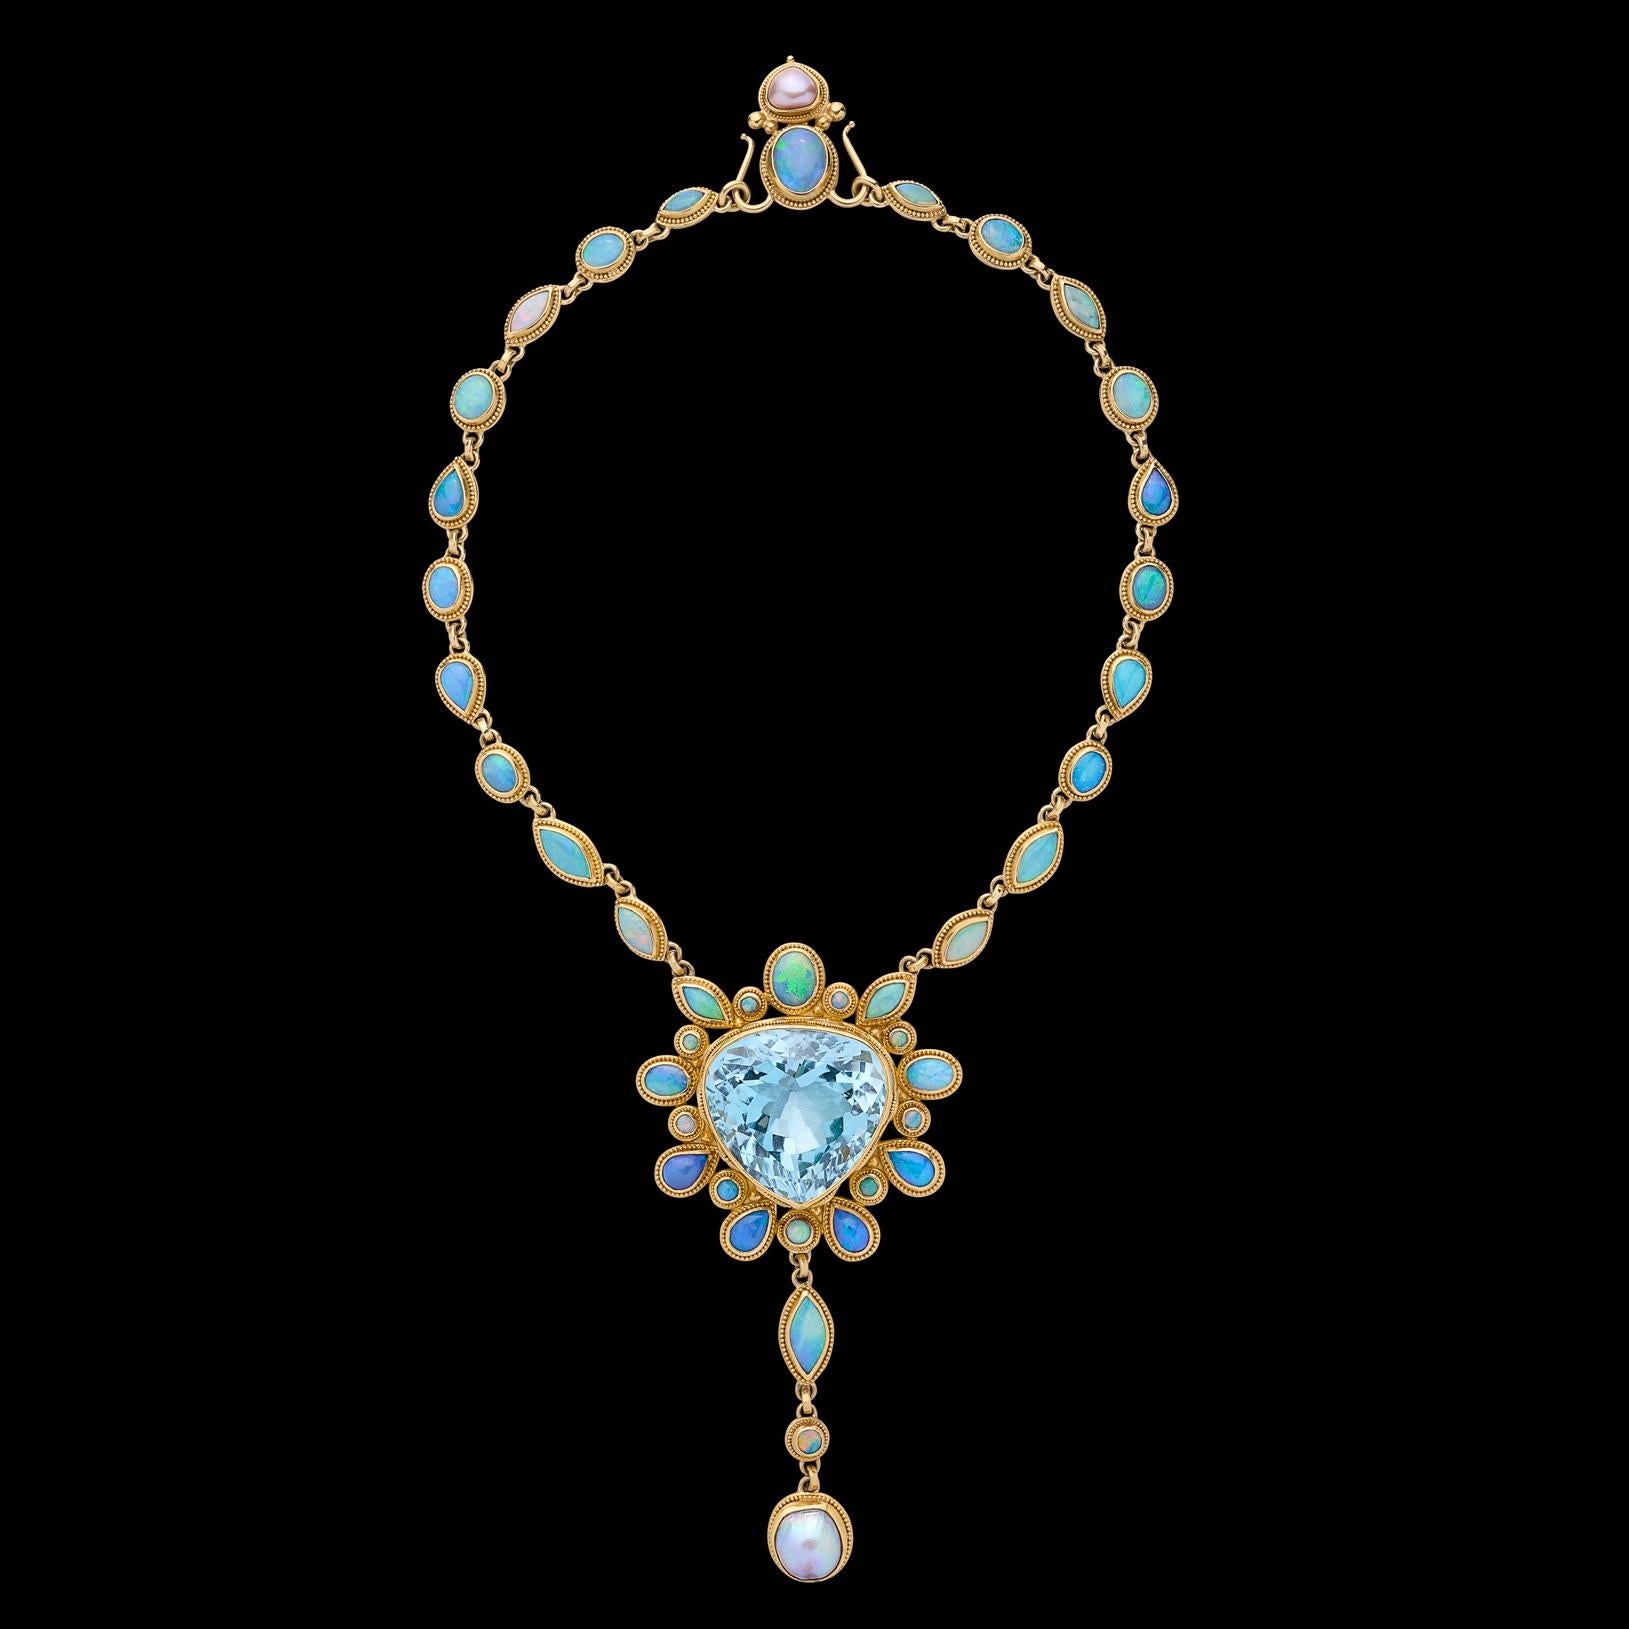 A true showstopper! This 22k and 18k necklace by designer Luna Felix showcases an exceptional pear shaped natural blue topaz weighing approximately 103 carats. The topaz is set amidst round, pear shape, oval and marquise cut opals with gorgeous play